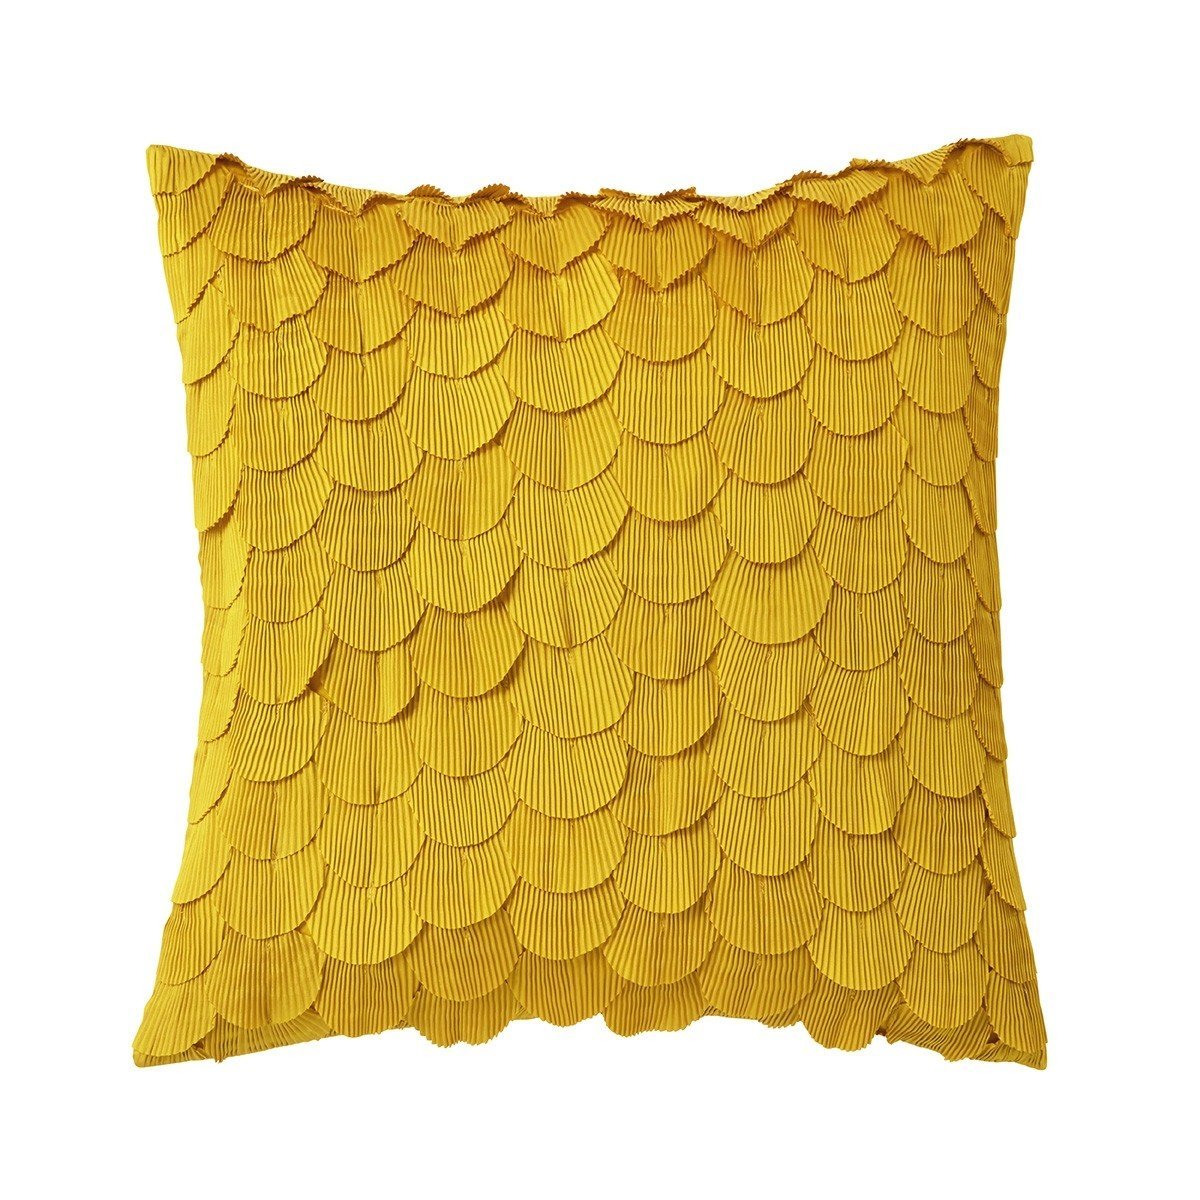 Ginkgo Decorative Pillow by Yves Delorme